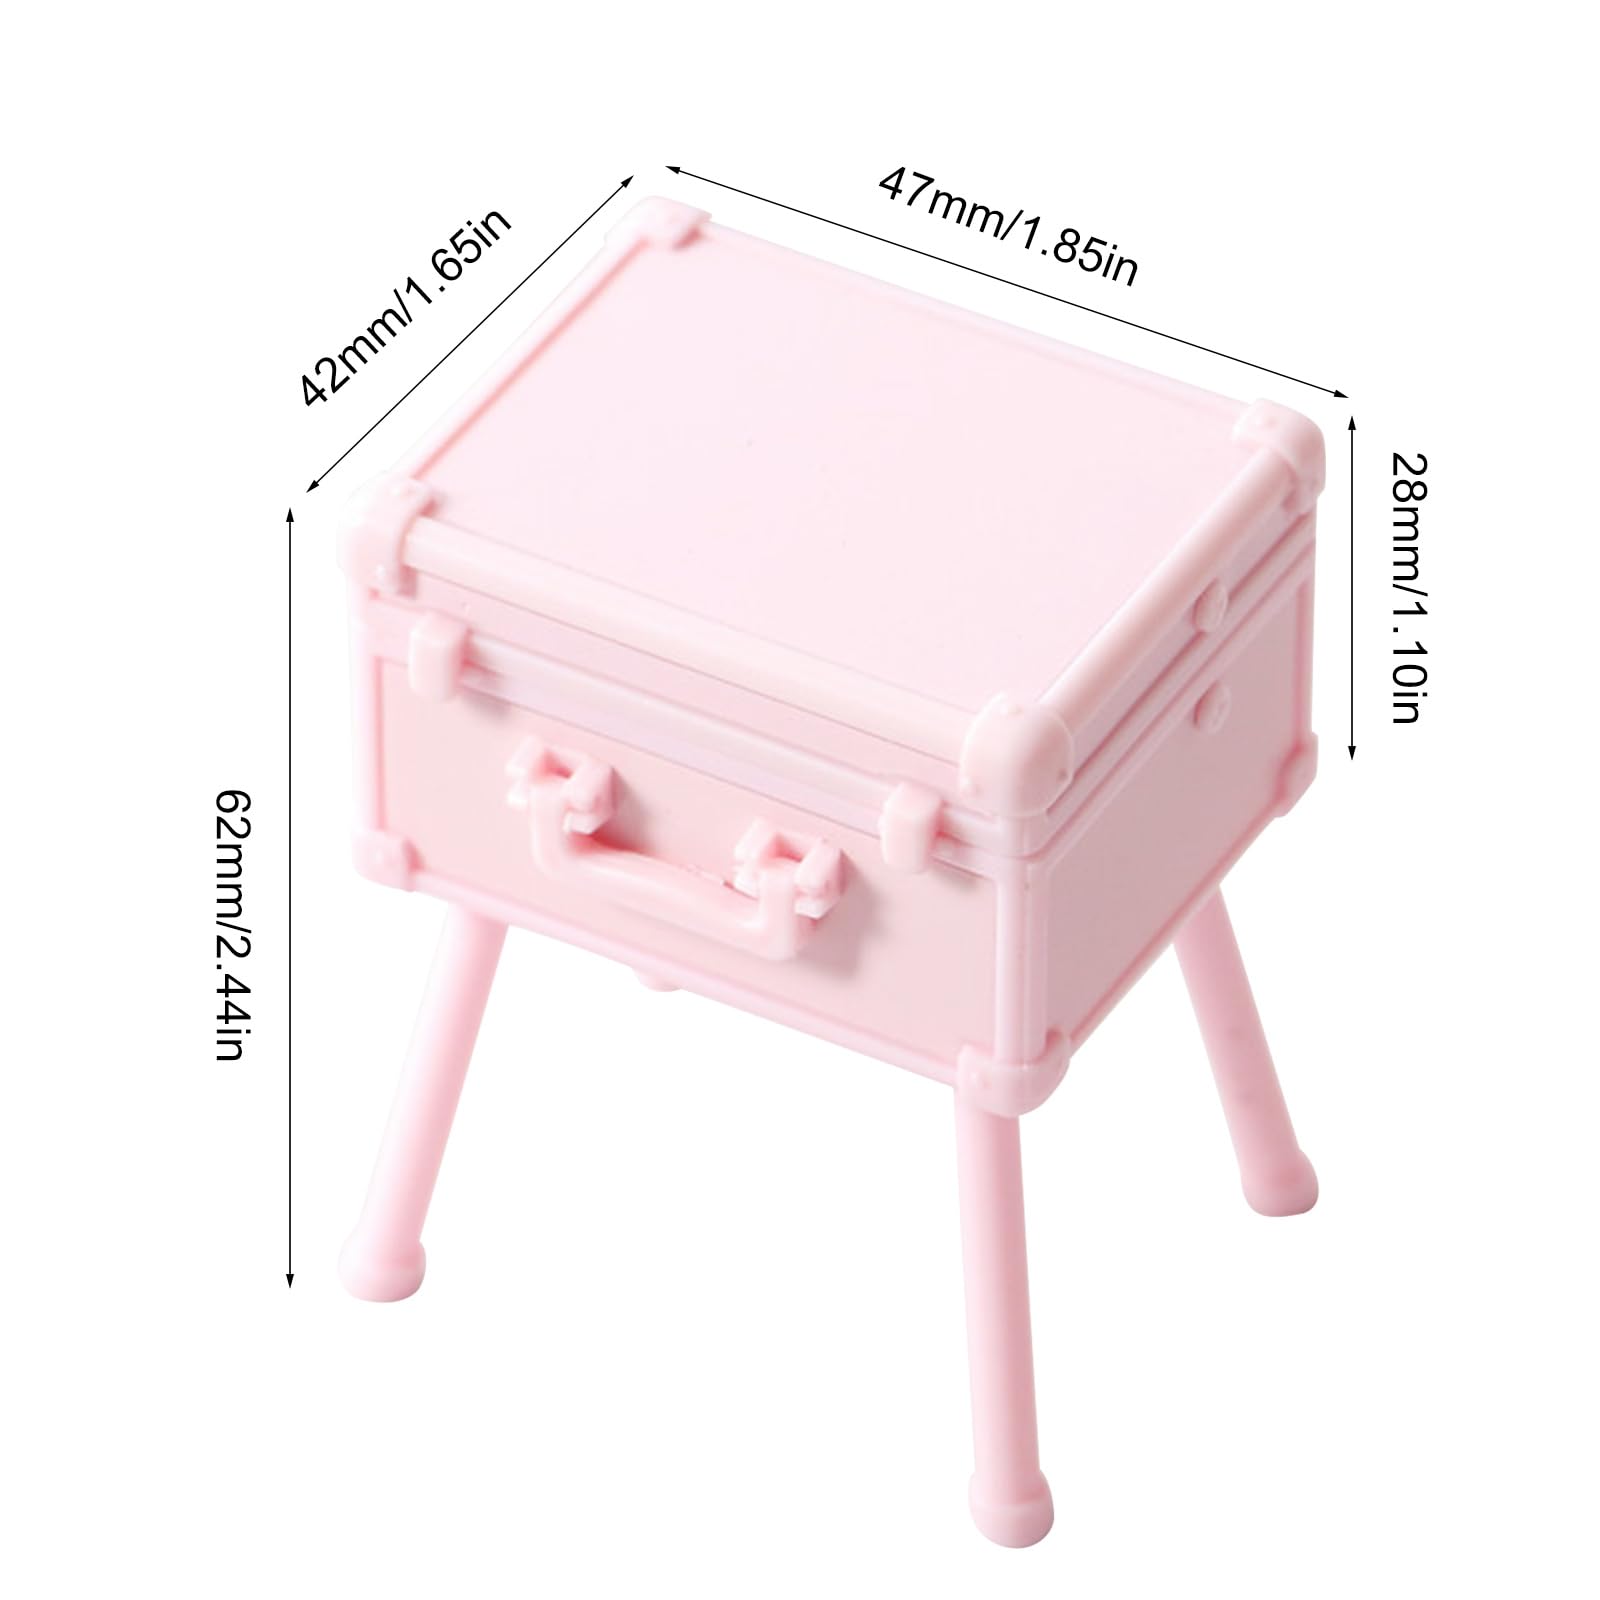 AOOOWER 1:12 Dollhouse Miniature Makeup Box Model Holiday Party Decoration Toy Ornament for Kindergarten School Student Miniature Room Decor